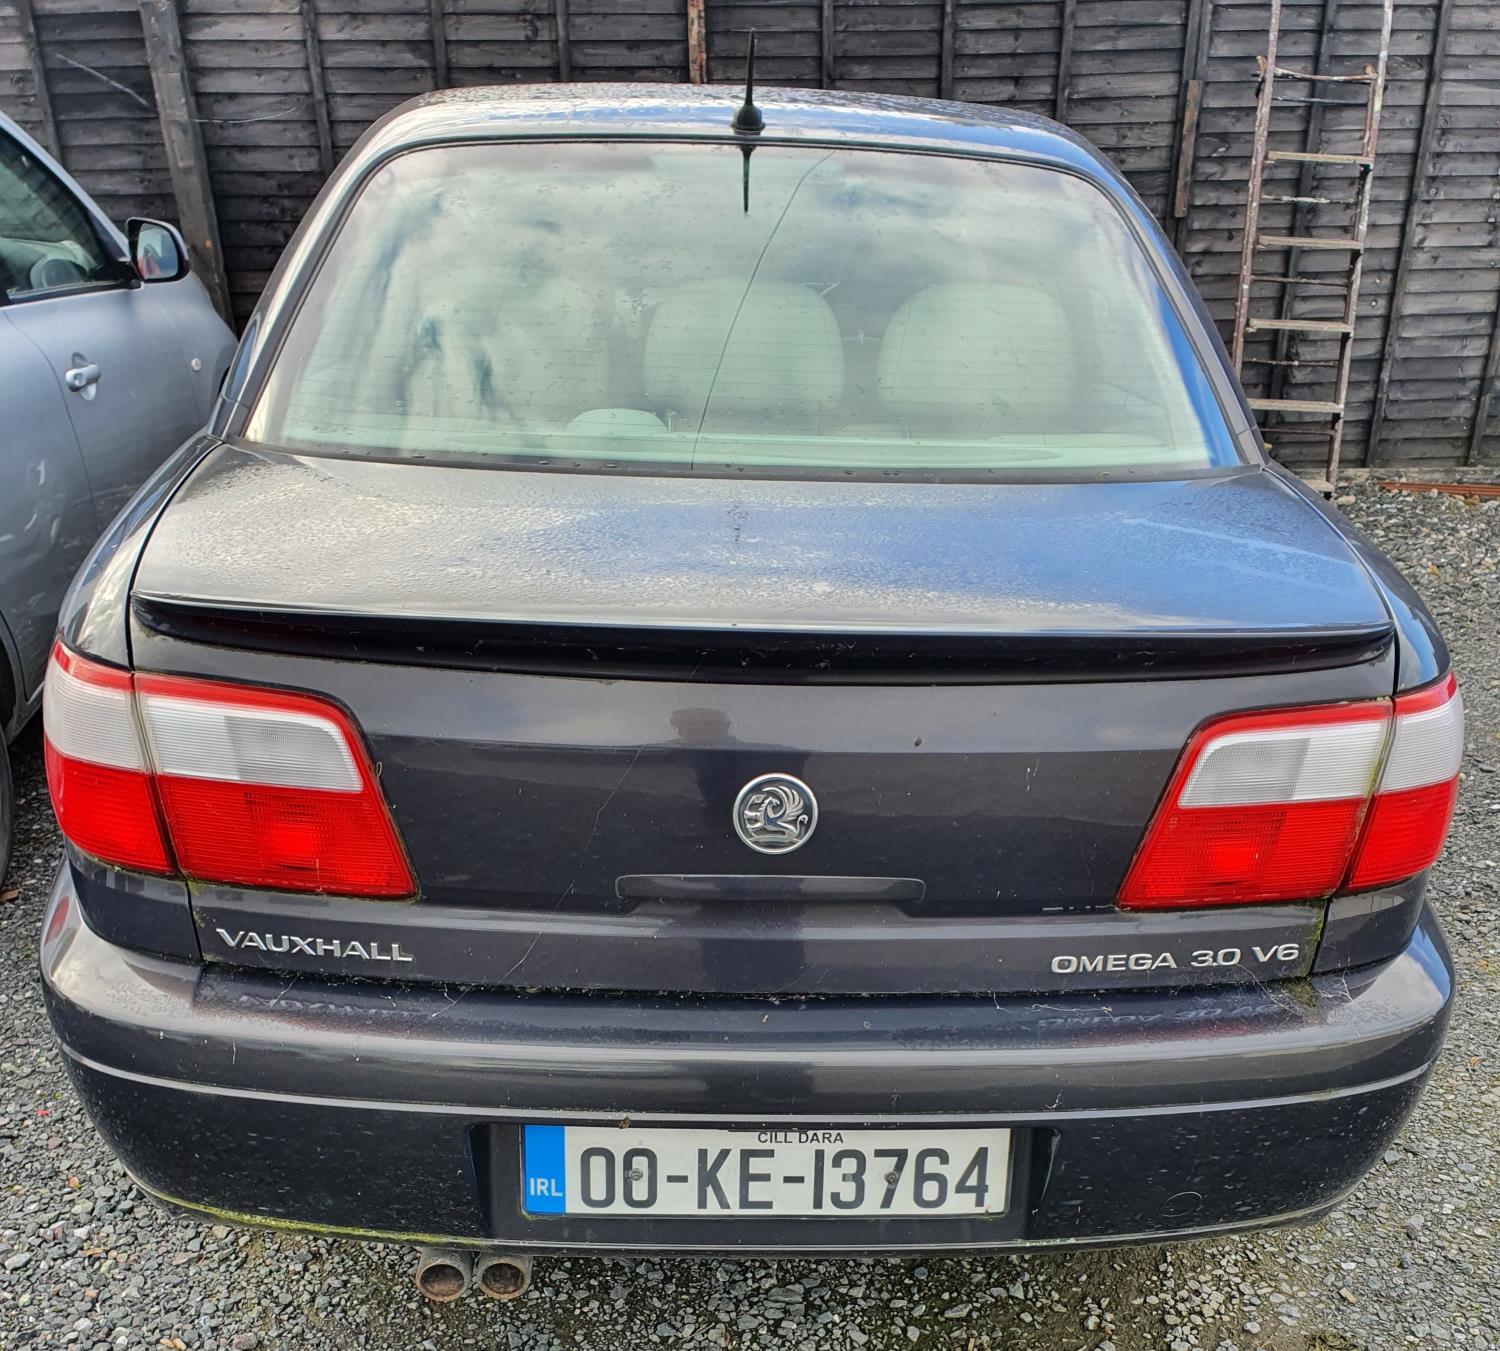 A 2000 Vauxhall Omega 3.1 V6. Automatic with cream leather seats. No paperwork. - Image 2 of 2